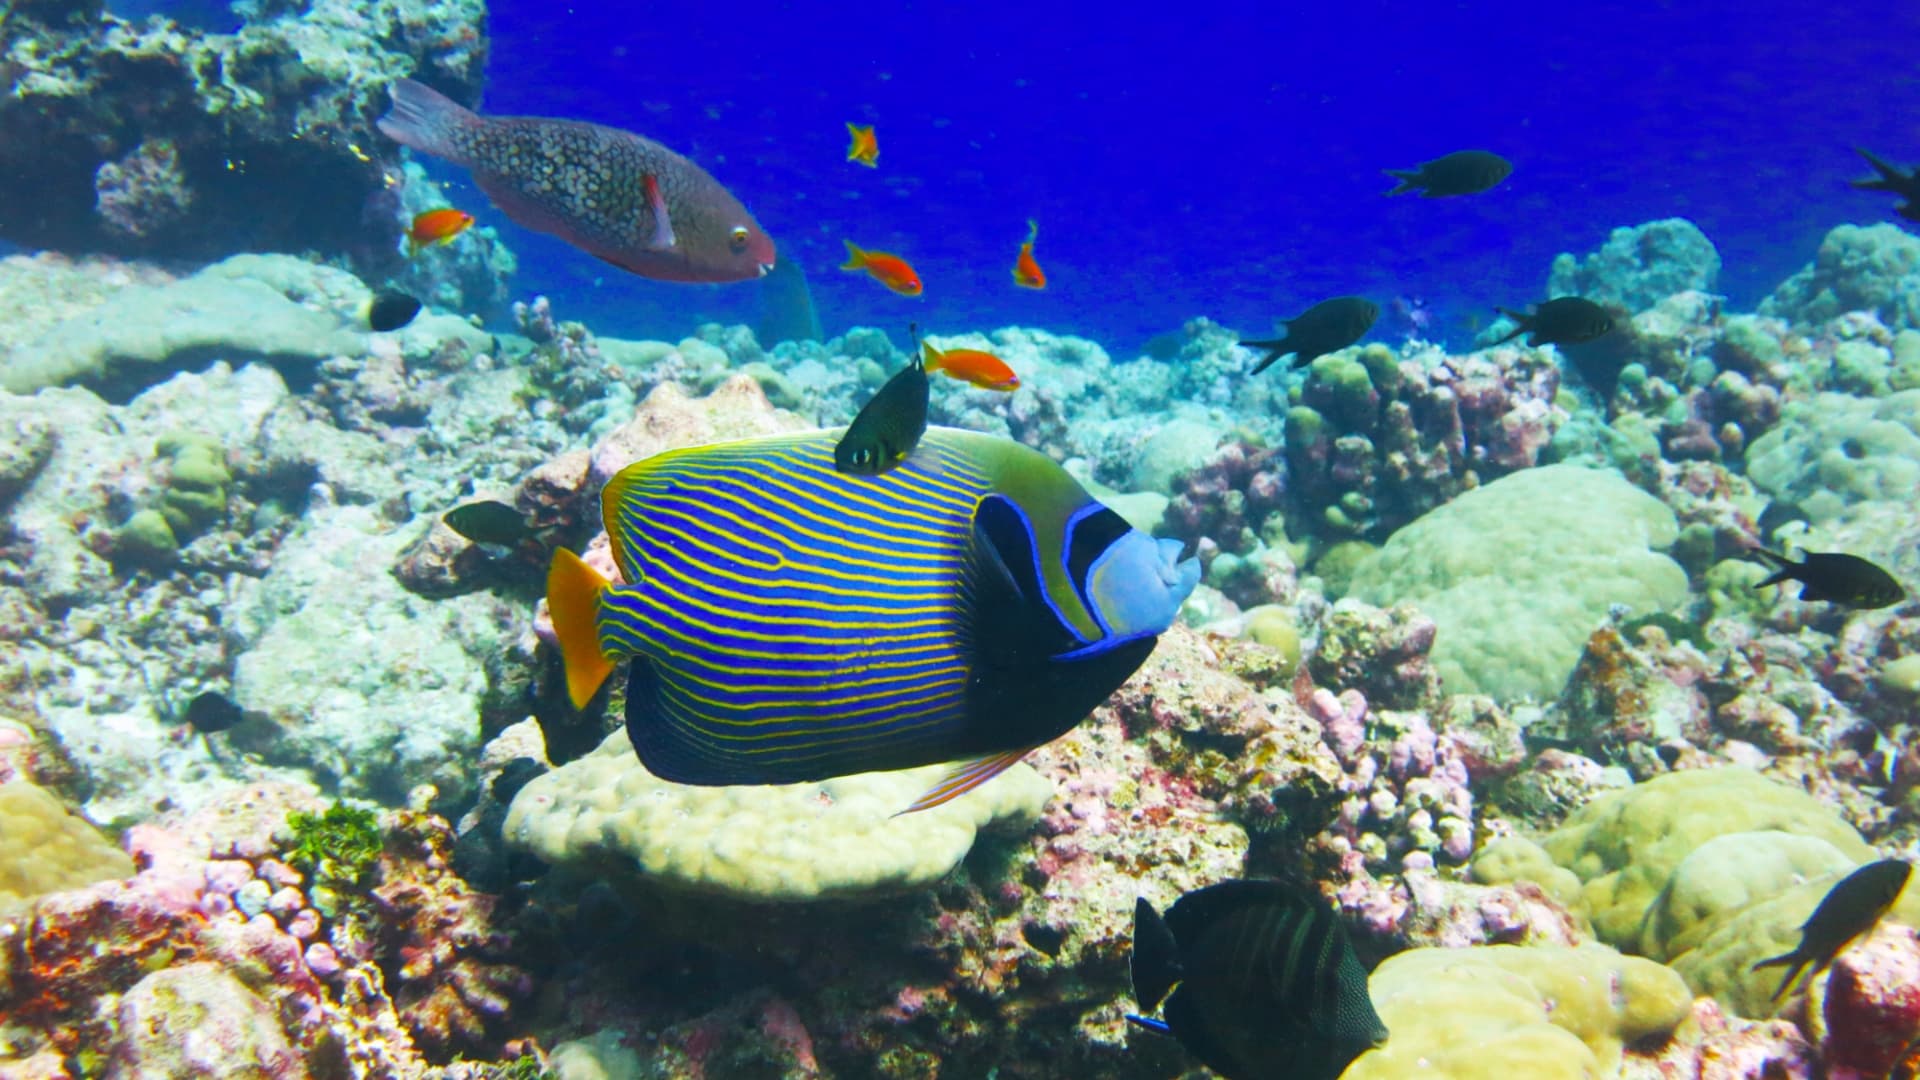 Fish swimming around a coral reef with a large fish in the centre of the image